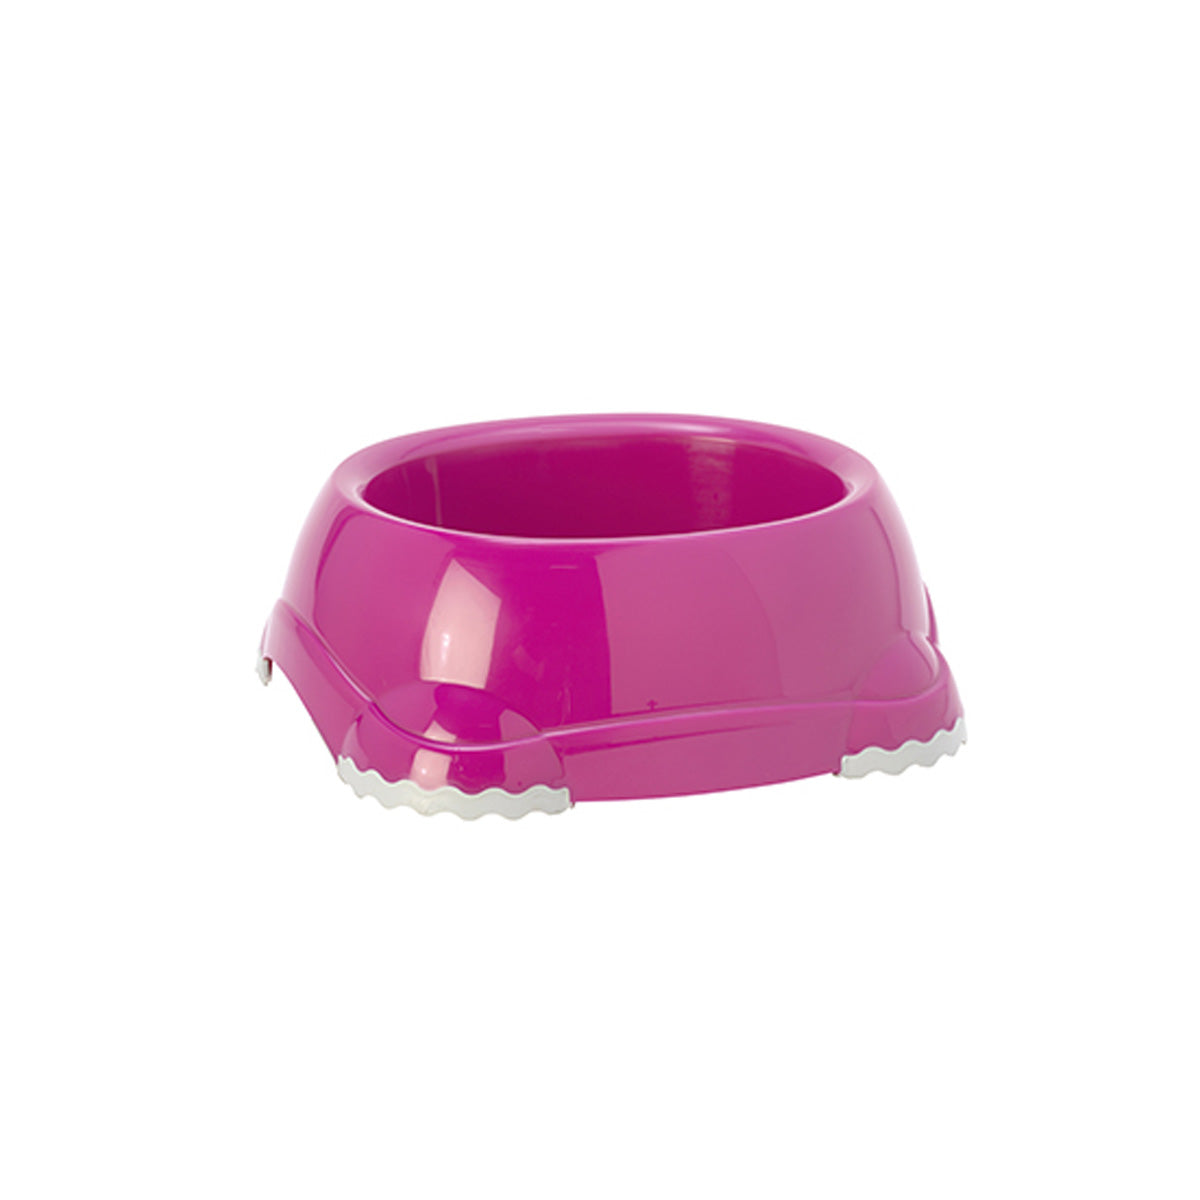 SMARTY BOWL 23 CM HOT PINK